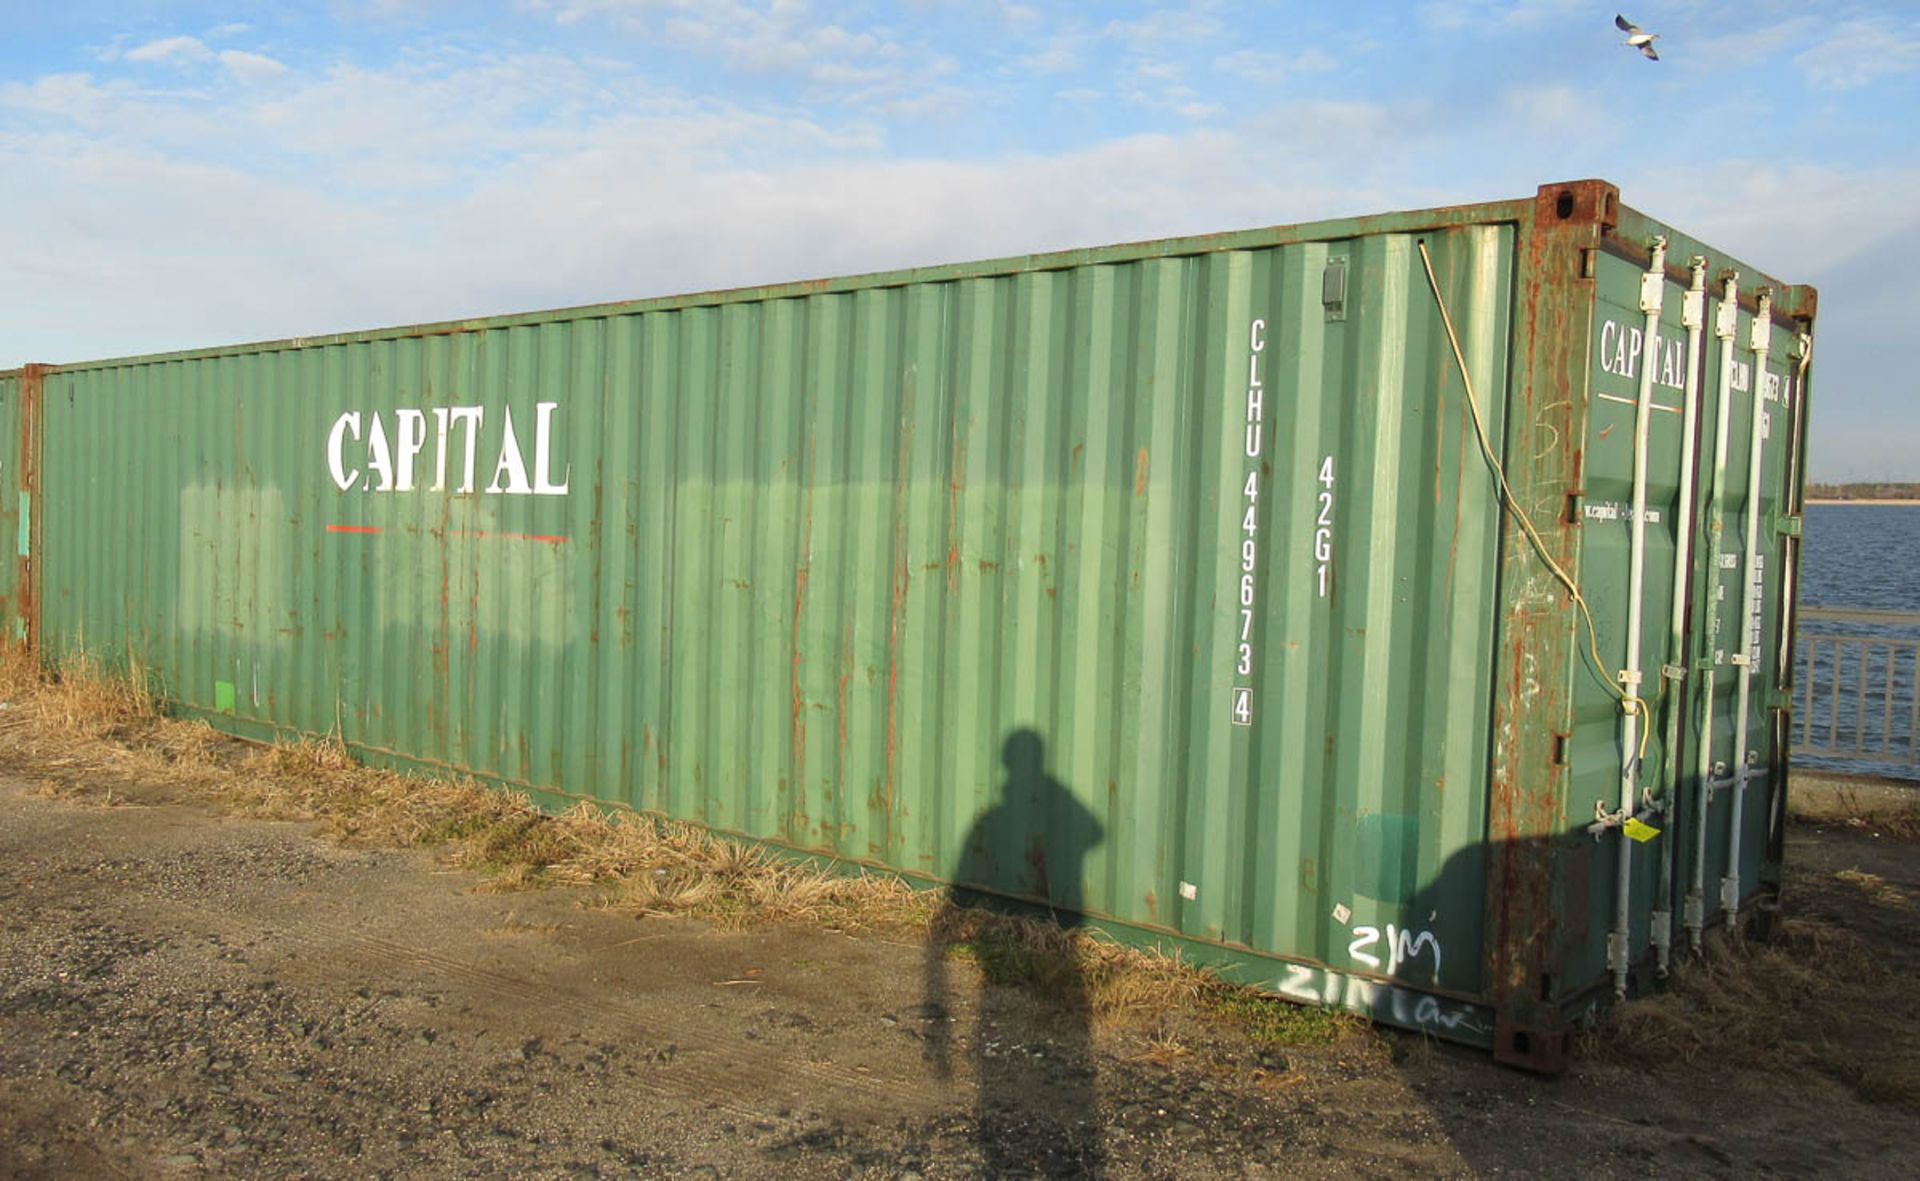 40' SHUNDE SHUN CONTAINER, TYPE SC40-CAP-01, S/N: S194117 (2003) [LOCATED @ MARINE PARKWAY - Image 2 of 5